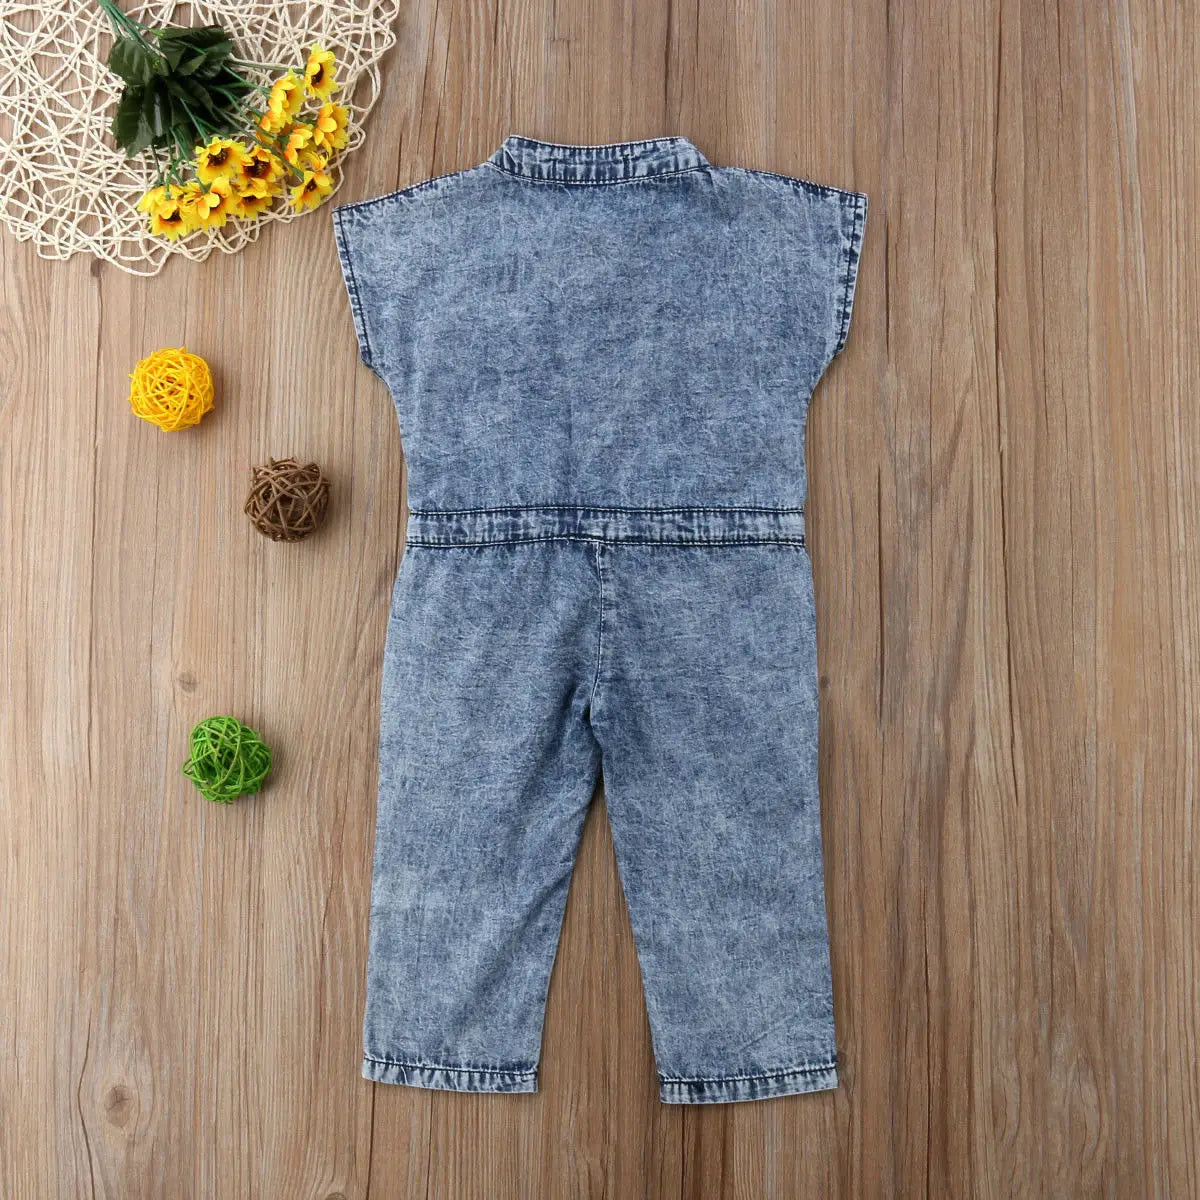 Summer Toddler Kids Baby Girl Clothing Denim Sleeveless Romper Jumpsuit Playsuit Long Pants Outfits 1-6T LUXLIFE BRANDS